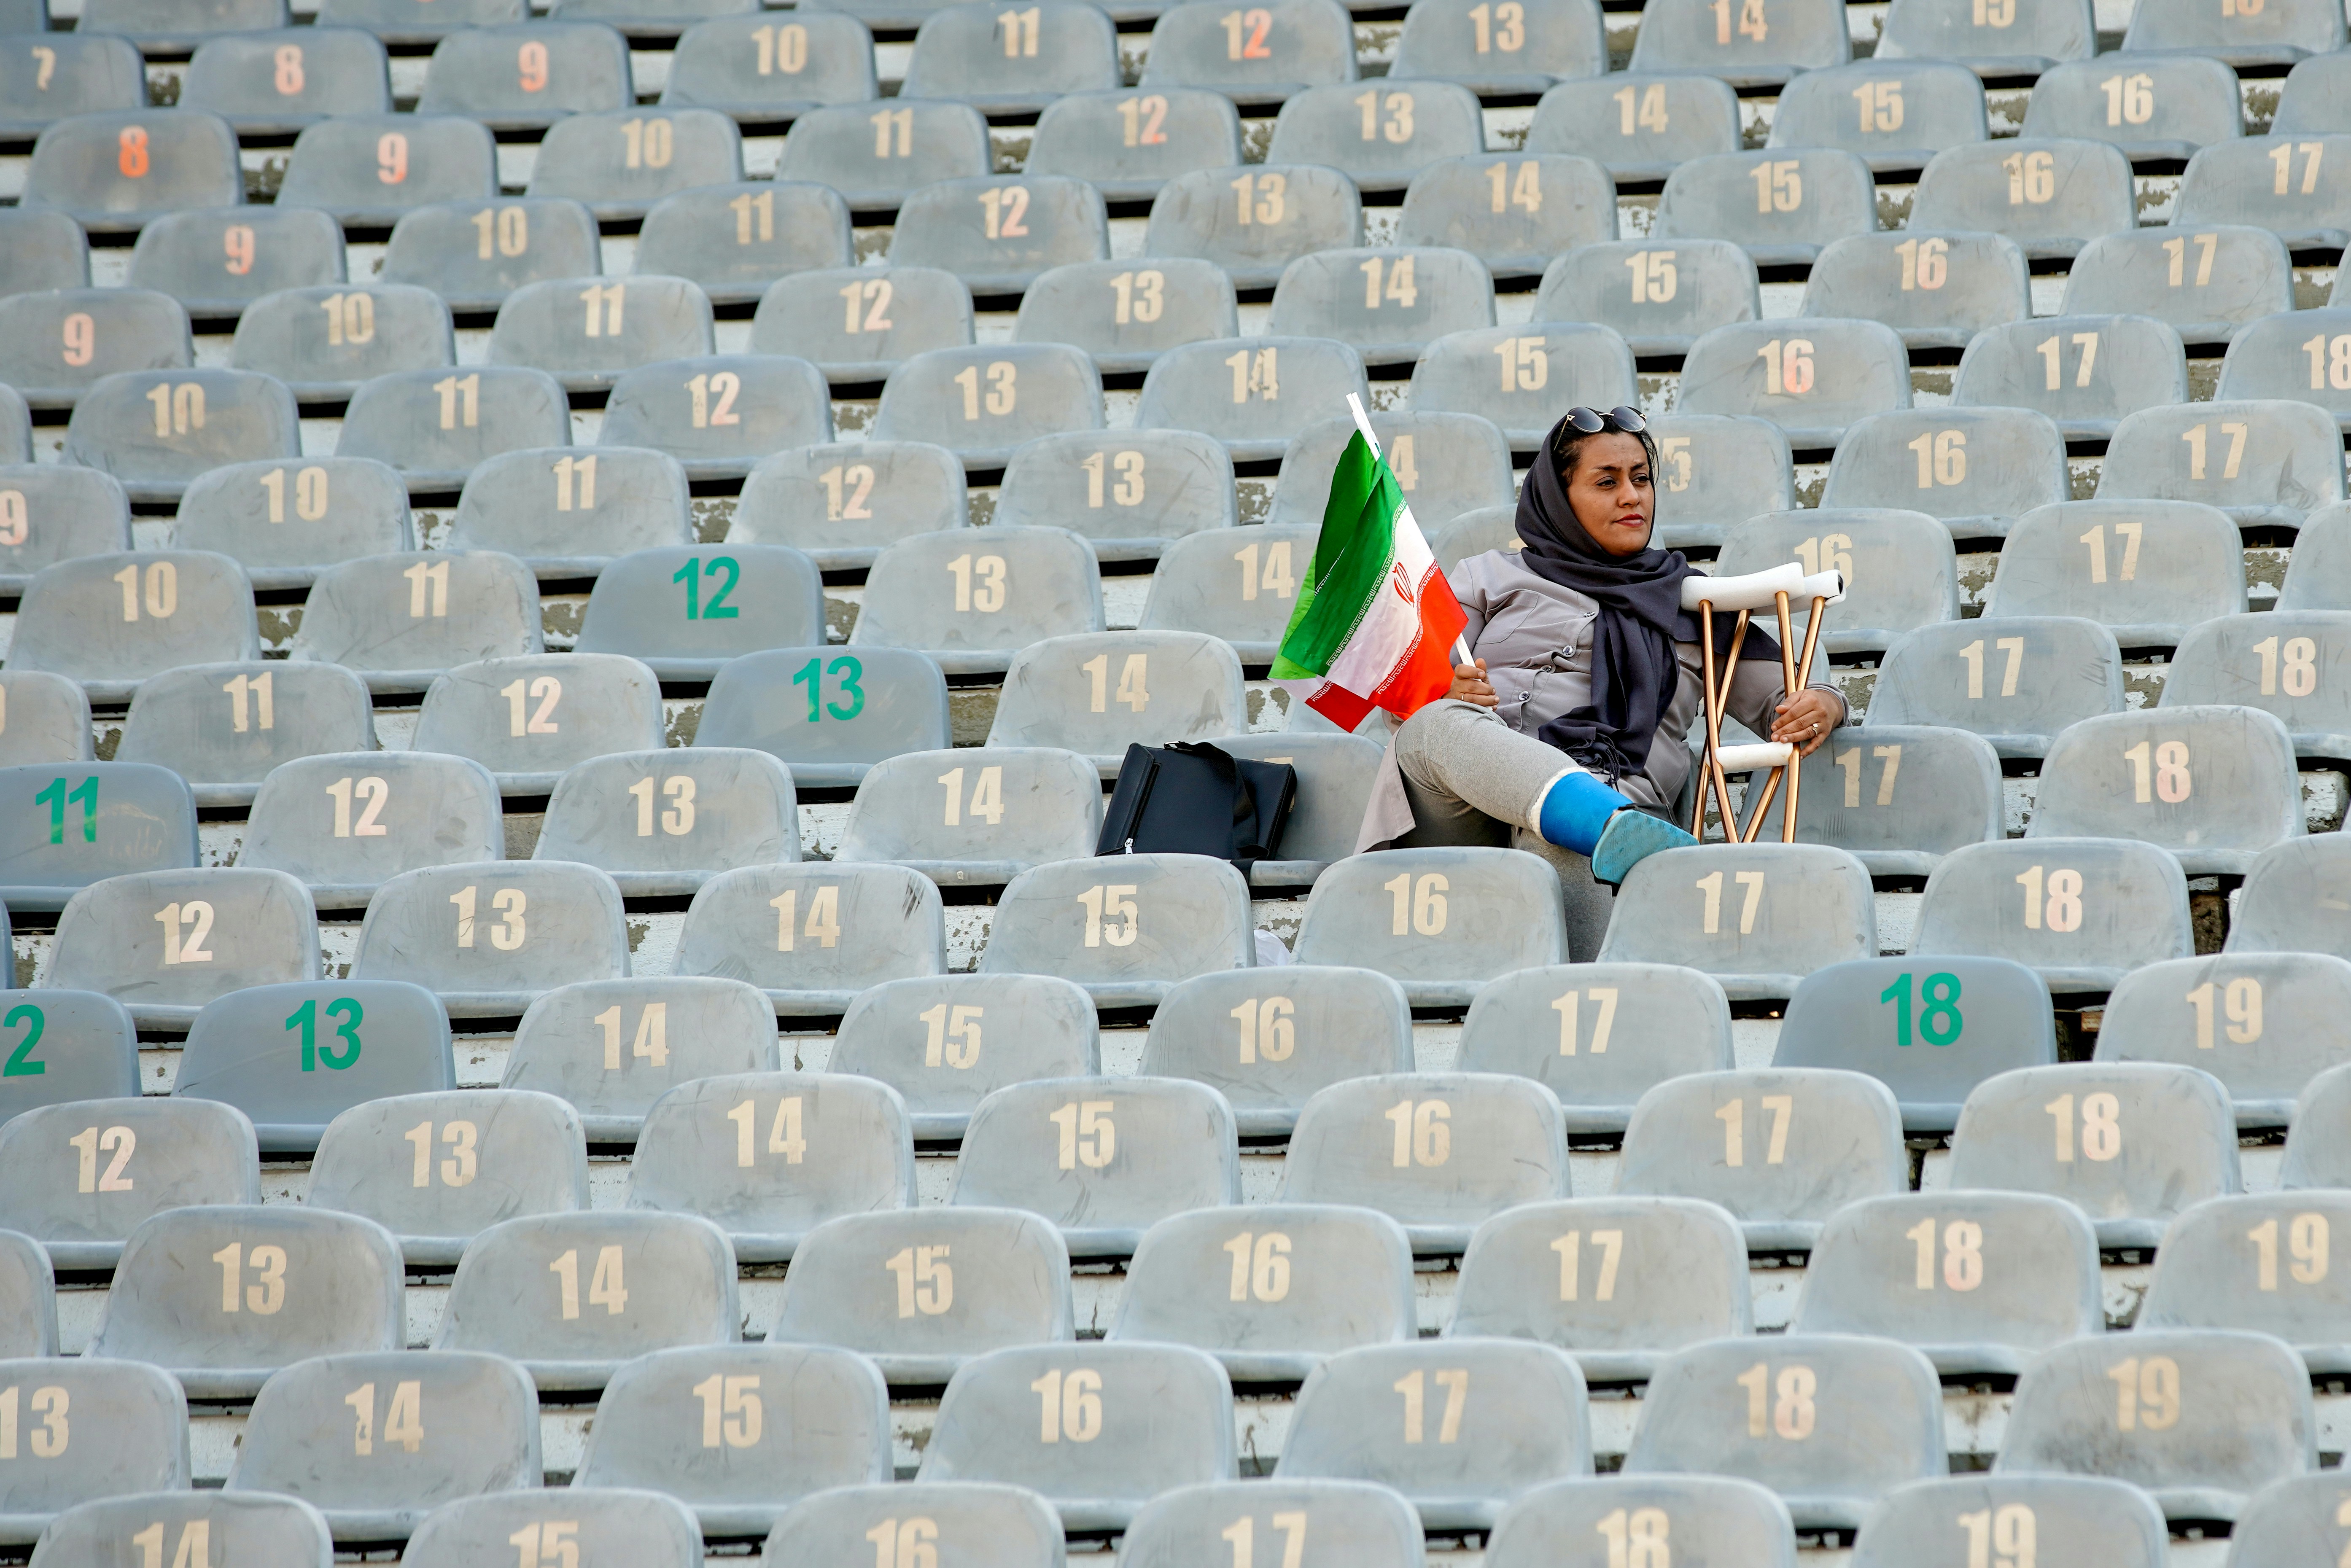 Entry of iranian women to the football stadium for the first time in Iranian history